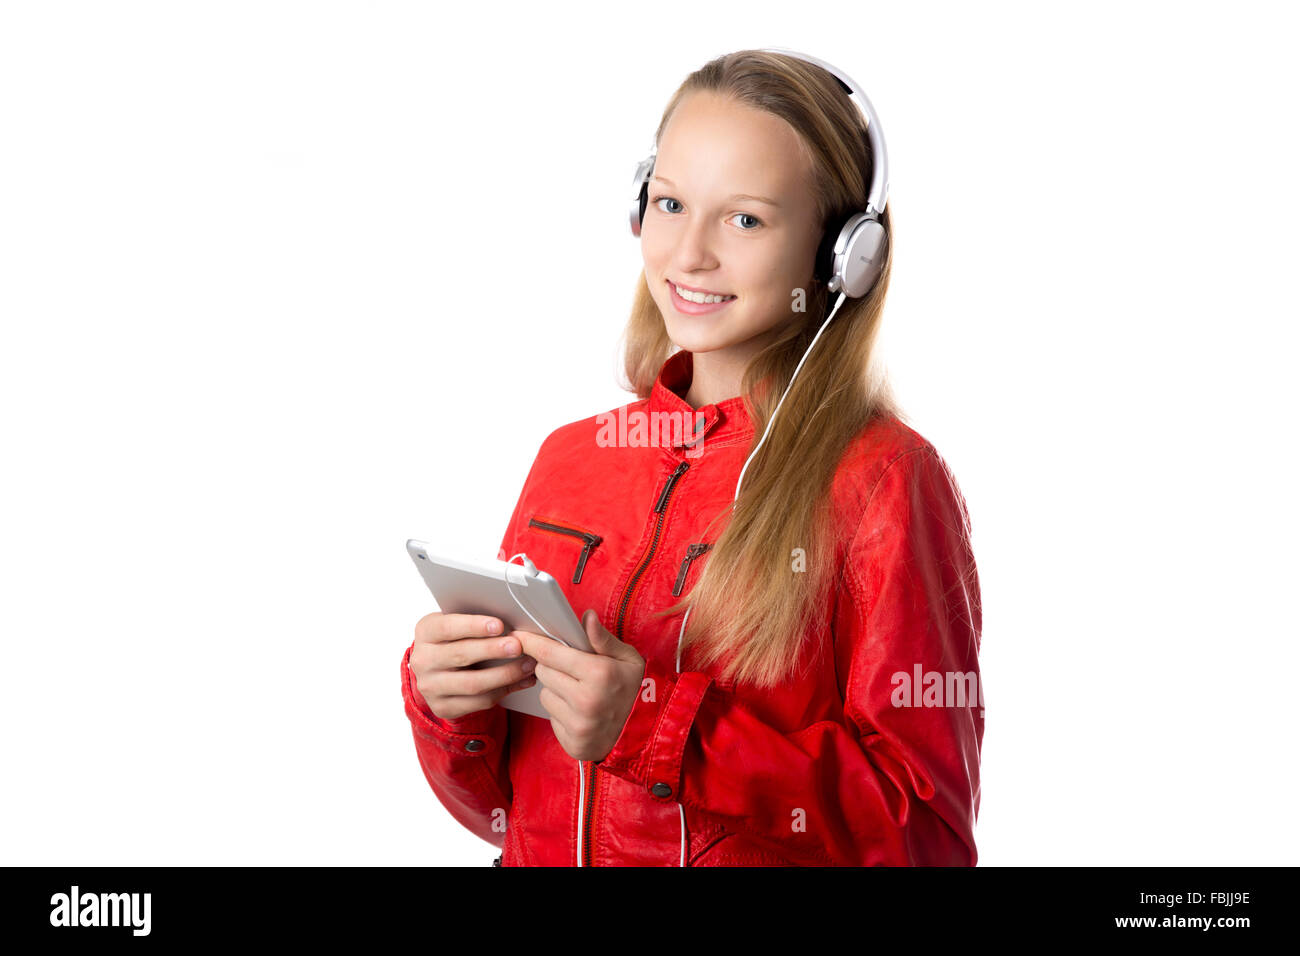 Portrait of happy beautiful casual teenage girl wearing red leather jacket and earphones holding modern tablet, friendly smiling Stock Photo